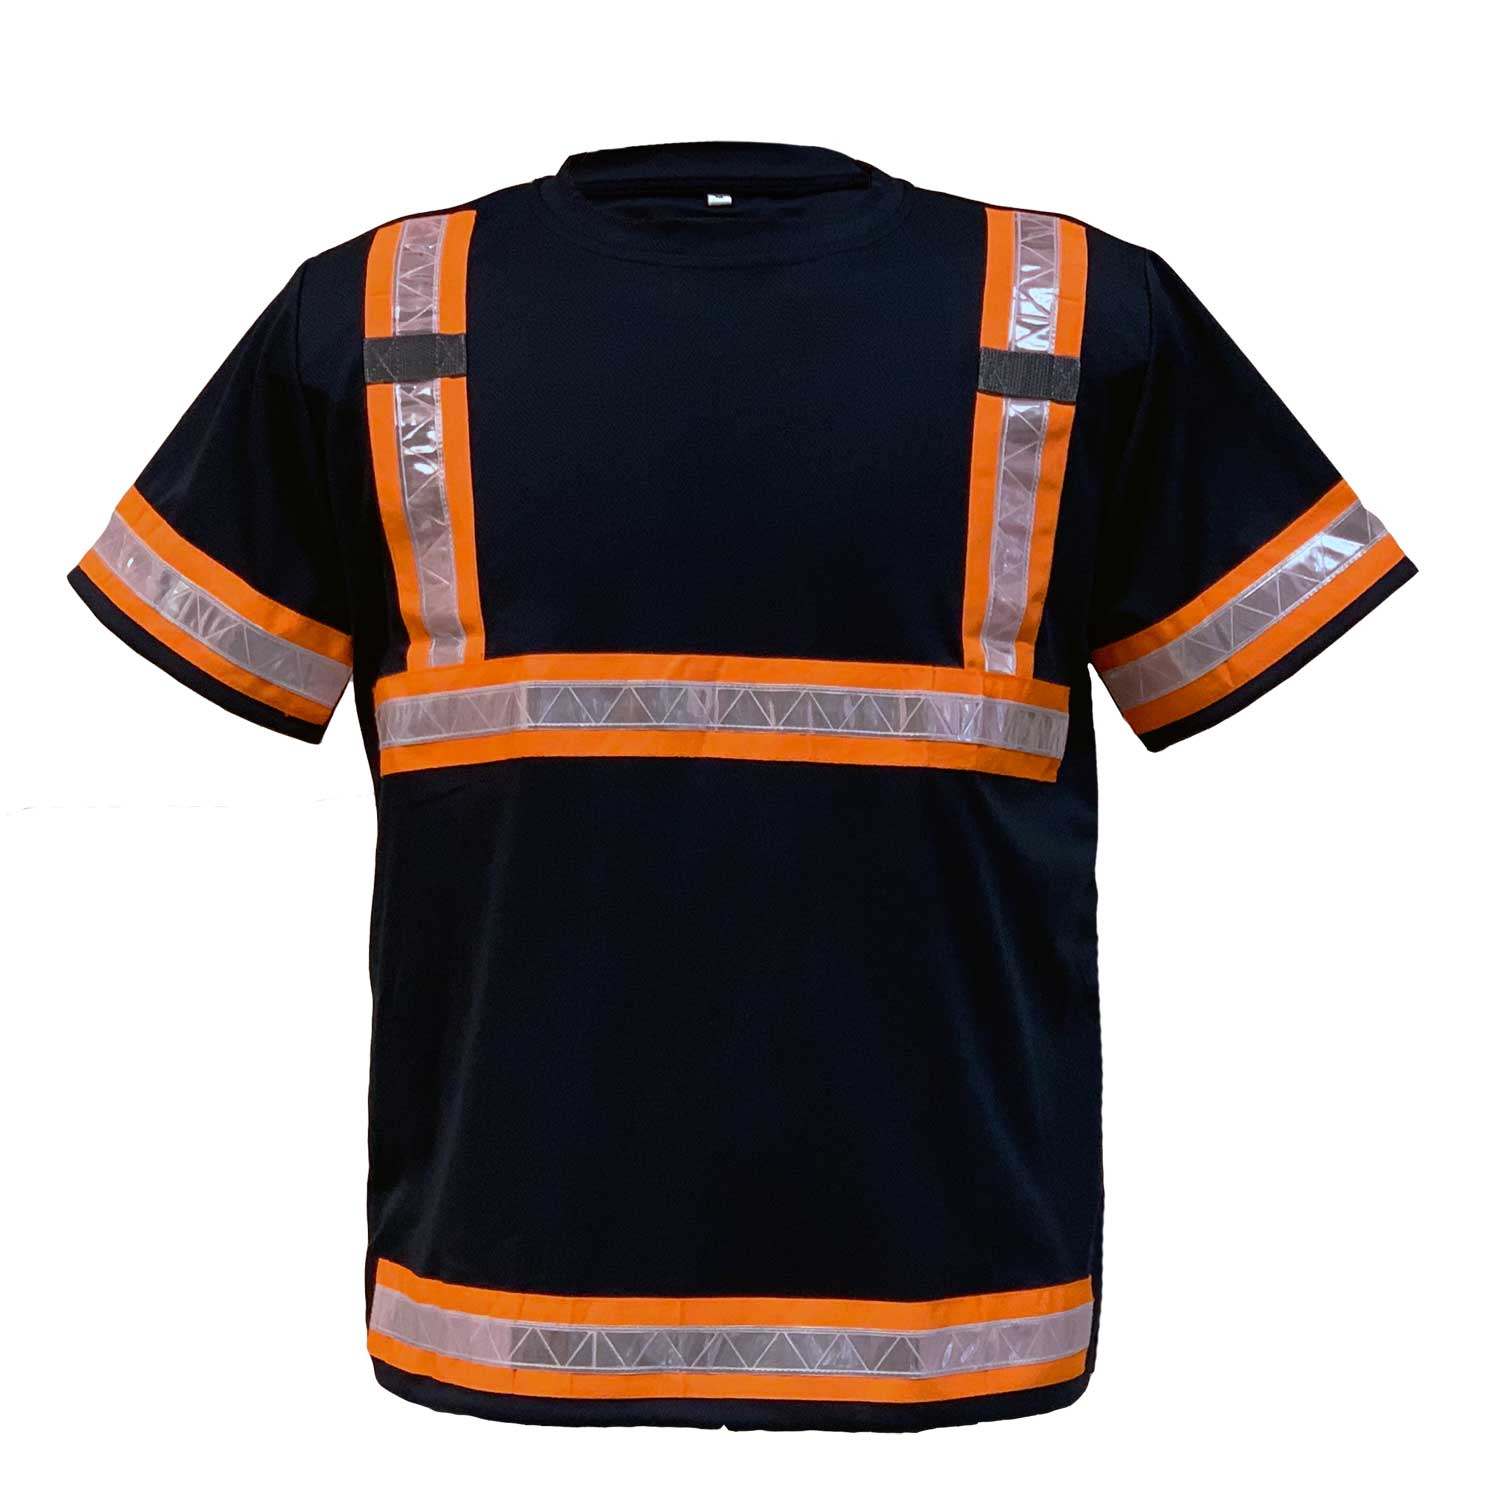 Reflective Safety Work Shirts For Men - High Visibility Short Sleeve T Shirts ANSI Class 3 Gear with Reflective Tape